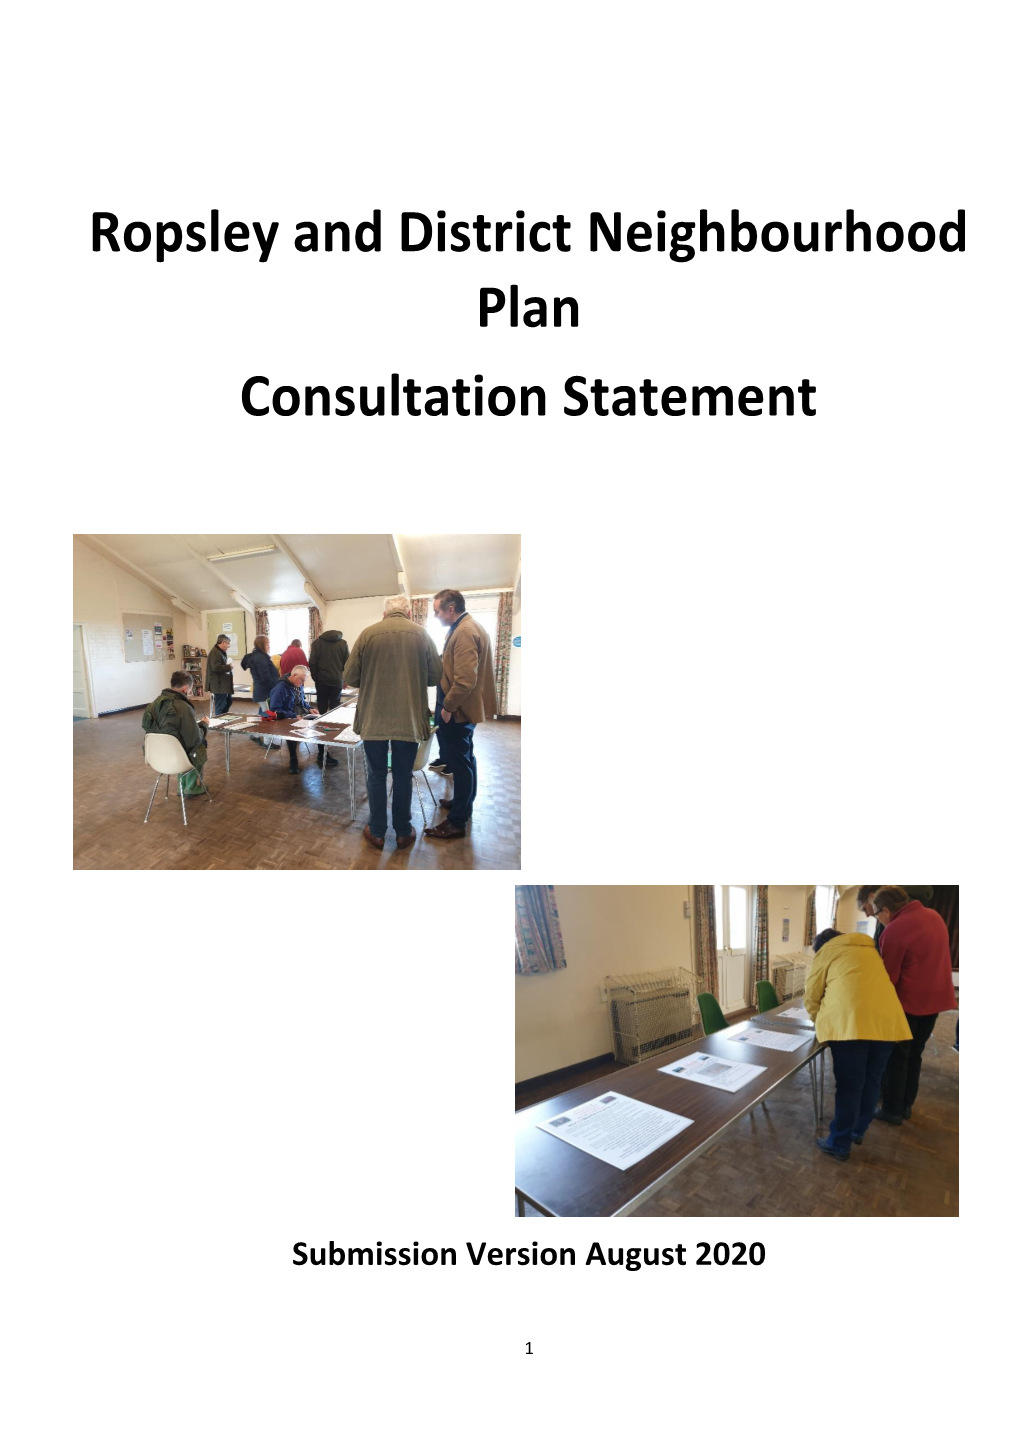 Ropsley and District Neighbourhood Plan Consultation Statement